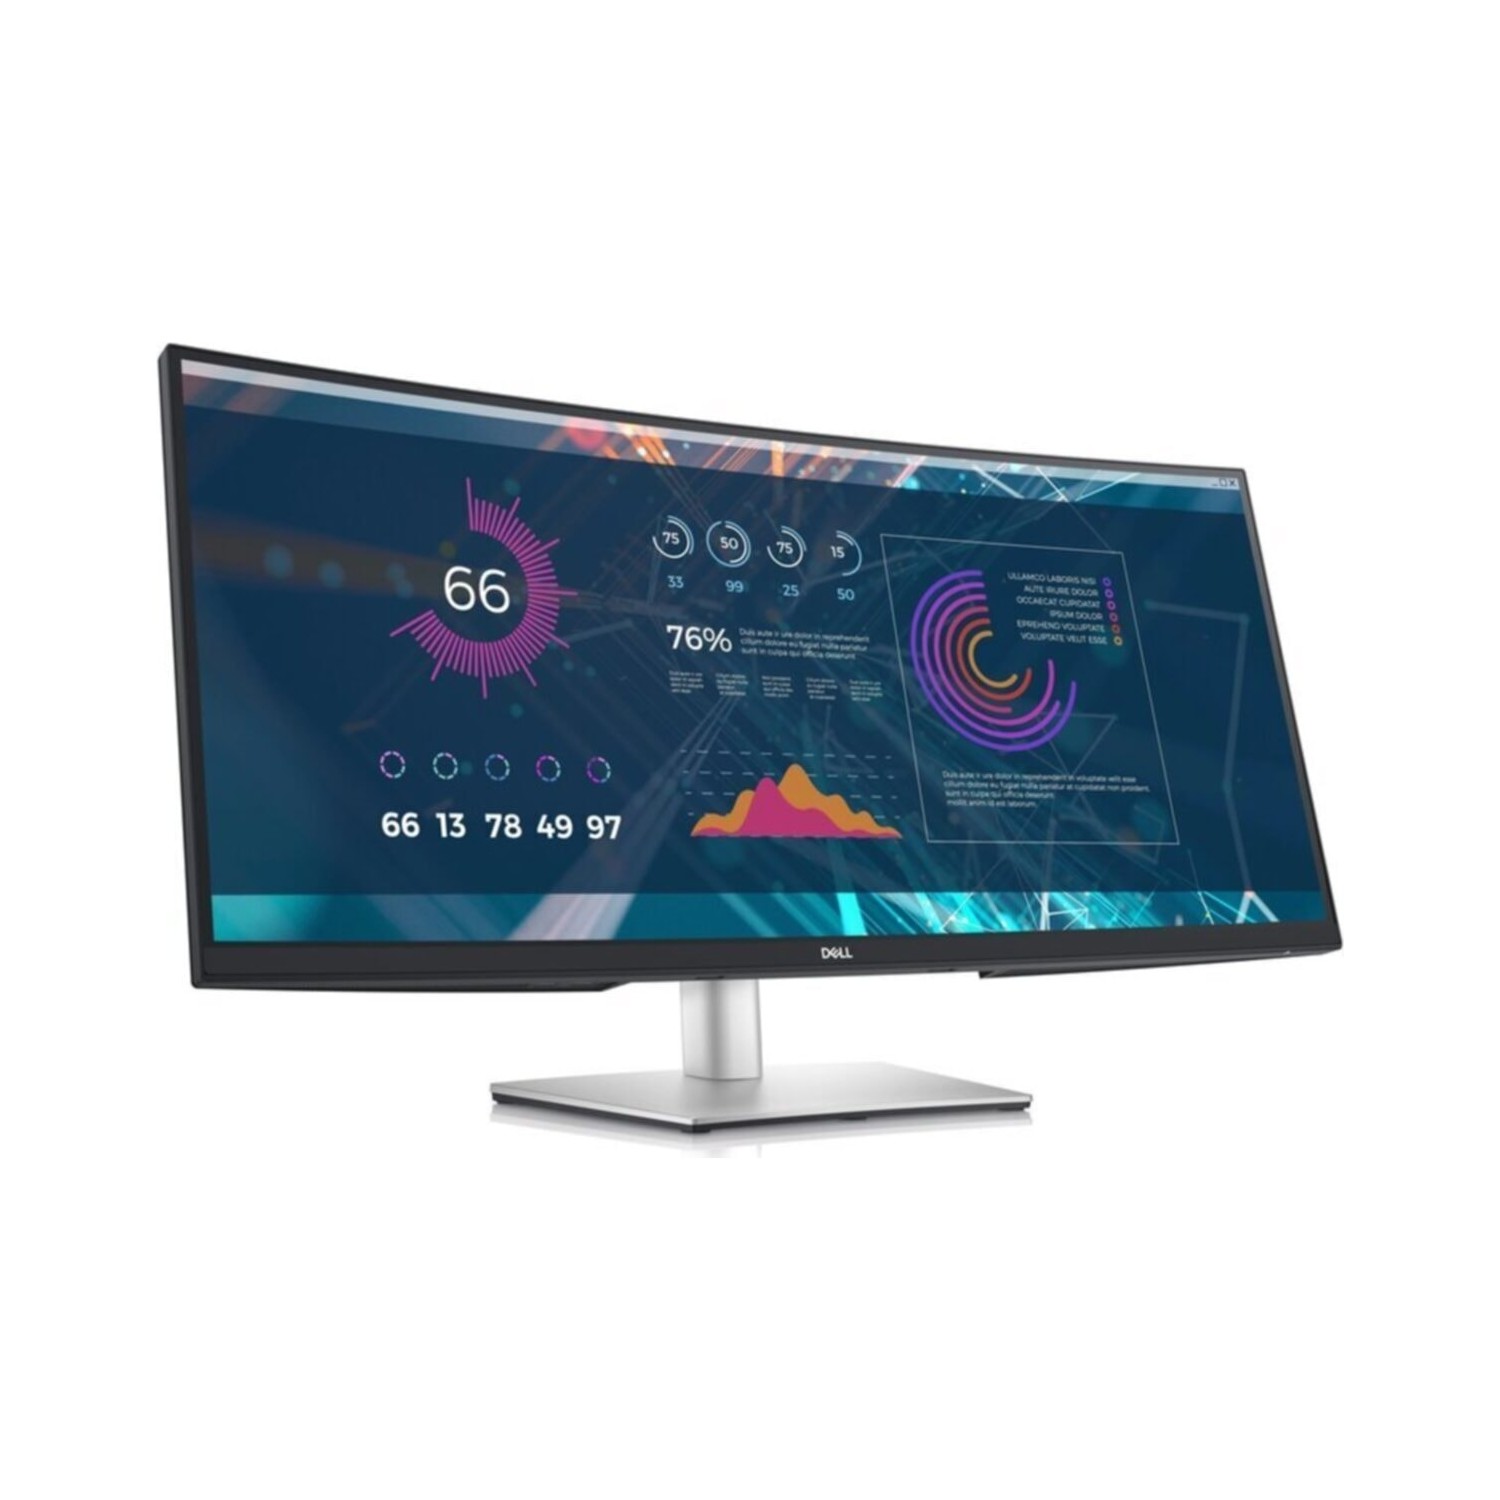 DELL%20P3421W%2034’’%208MS%20WQHD%203440x1440%20HDMI/DP/TYPE-C%2060HZ%20CURVED%20IPS%20MONITOR